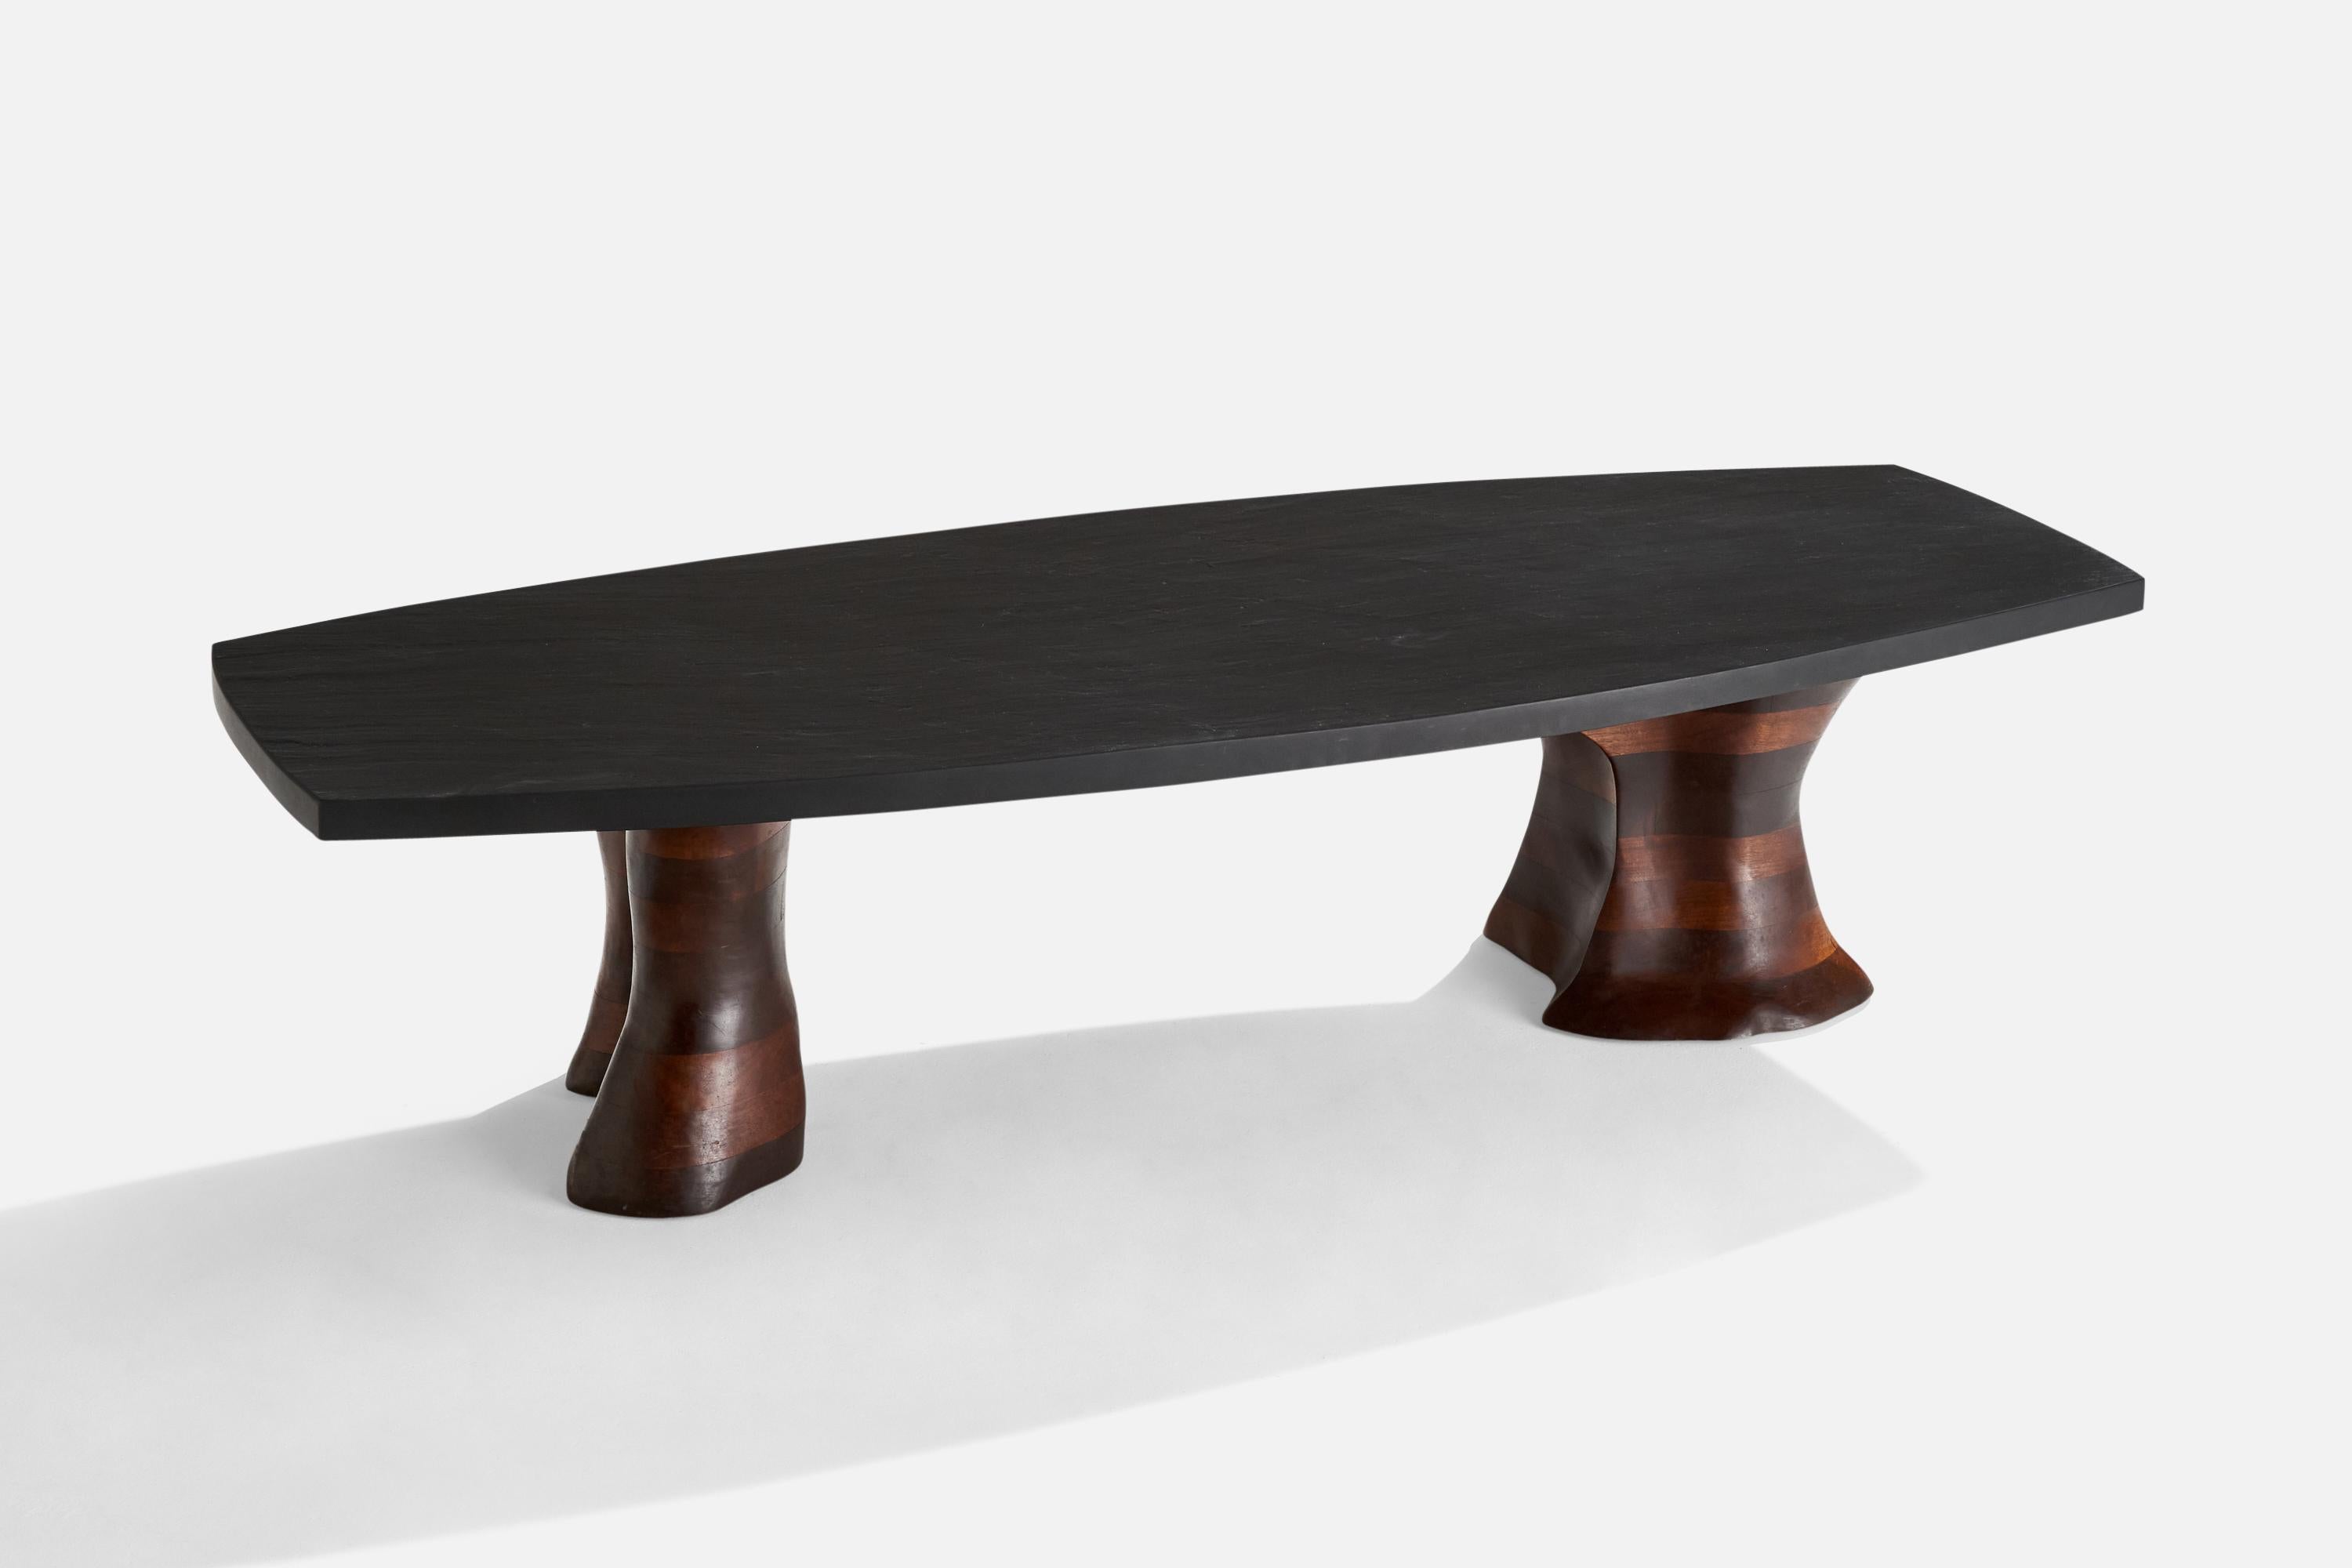 A black slate and walnut coffee table designed and produced in the US, c. 1970s.